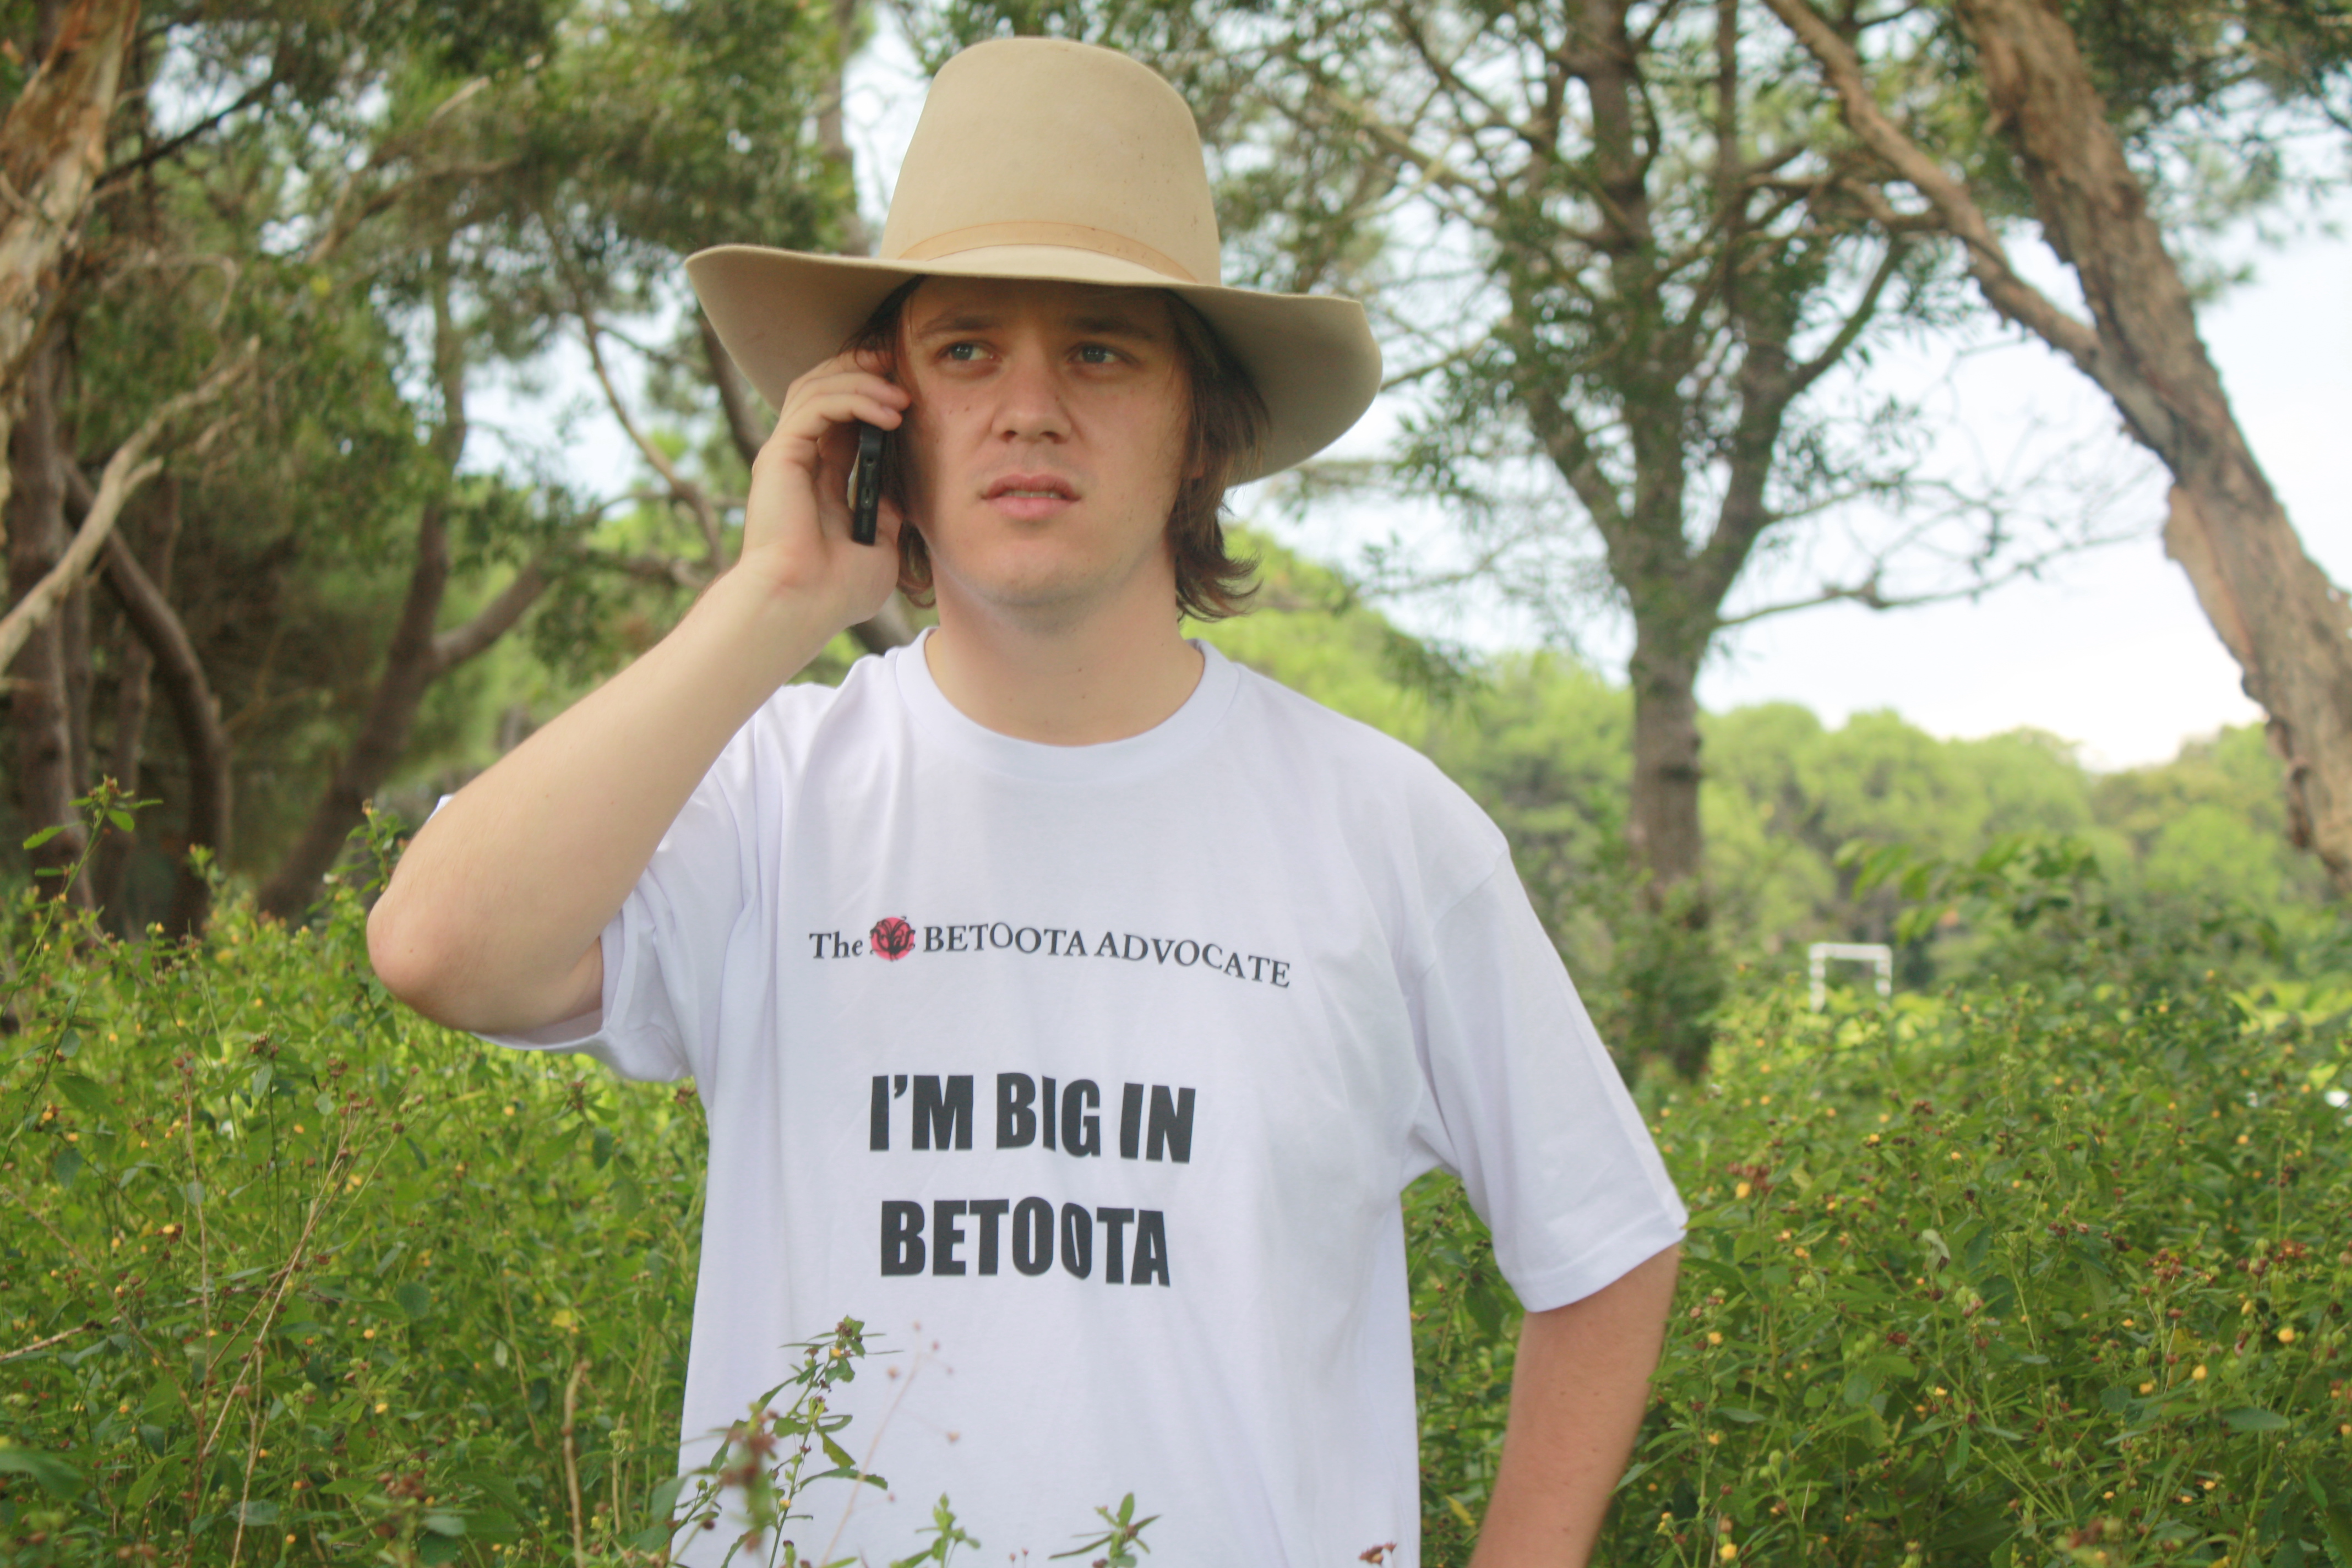 Errol Parker, editor-at-large and part owner of The Betoota Advocate